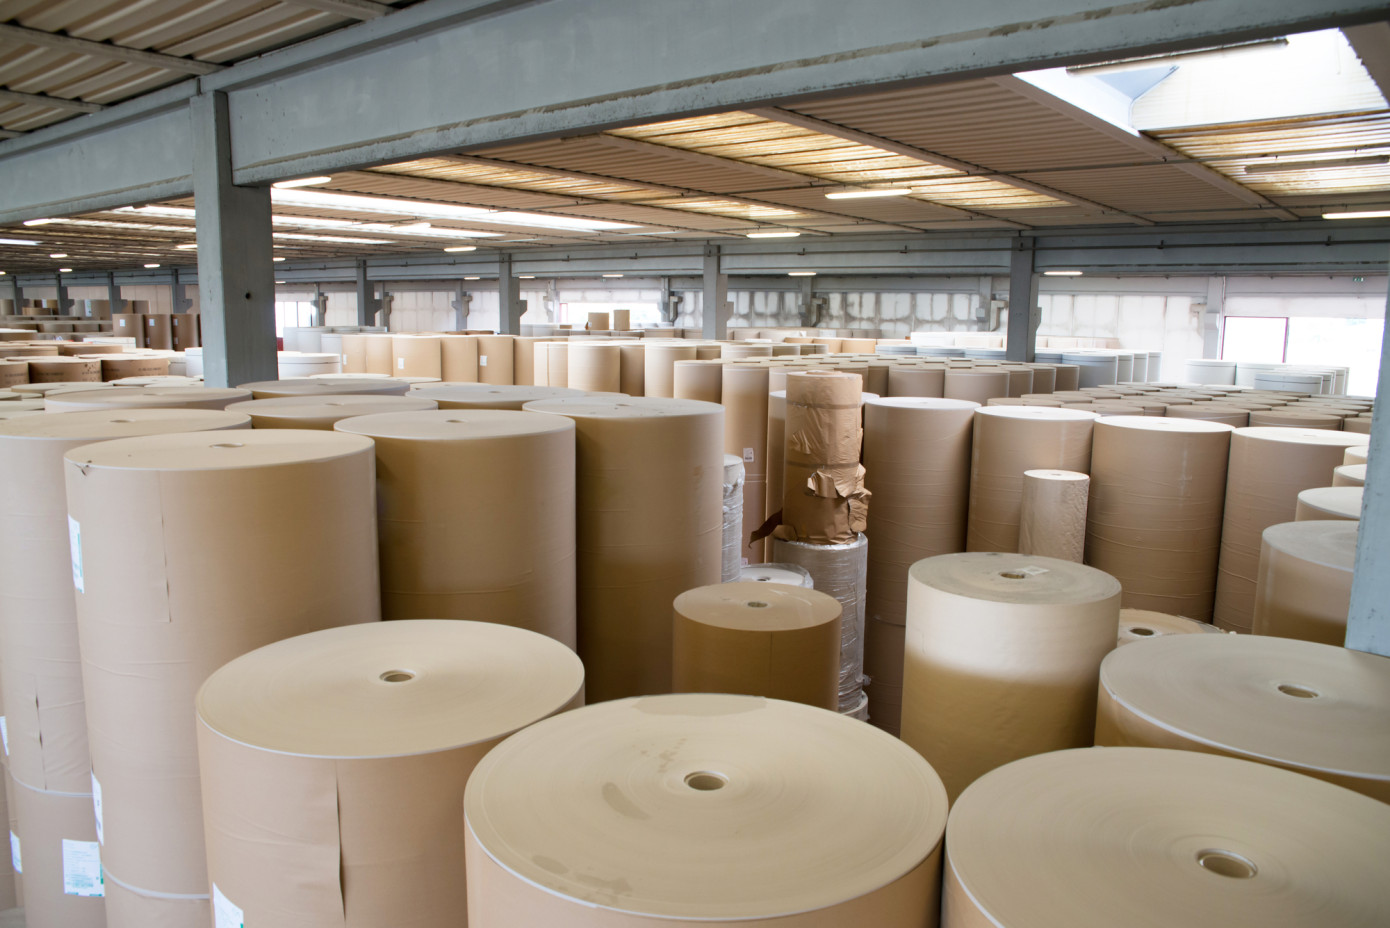 Russian Segezha Group sells its paper packaging plants in Europe